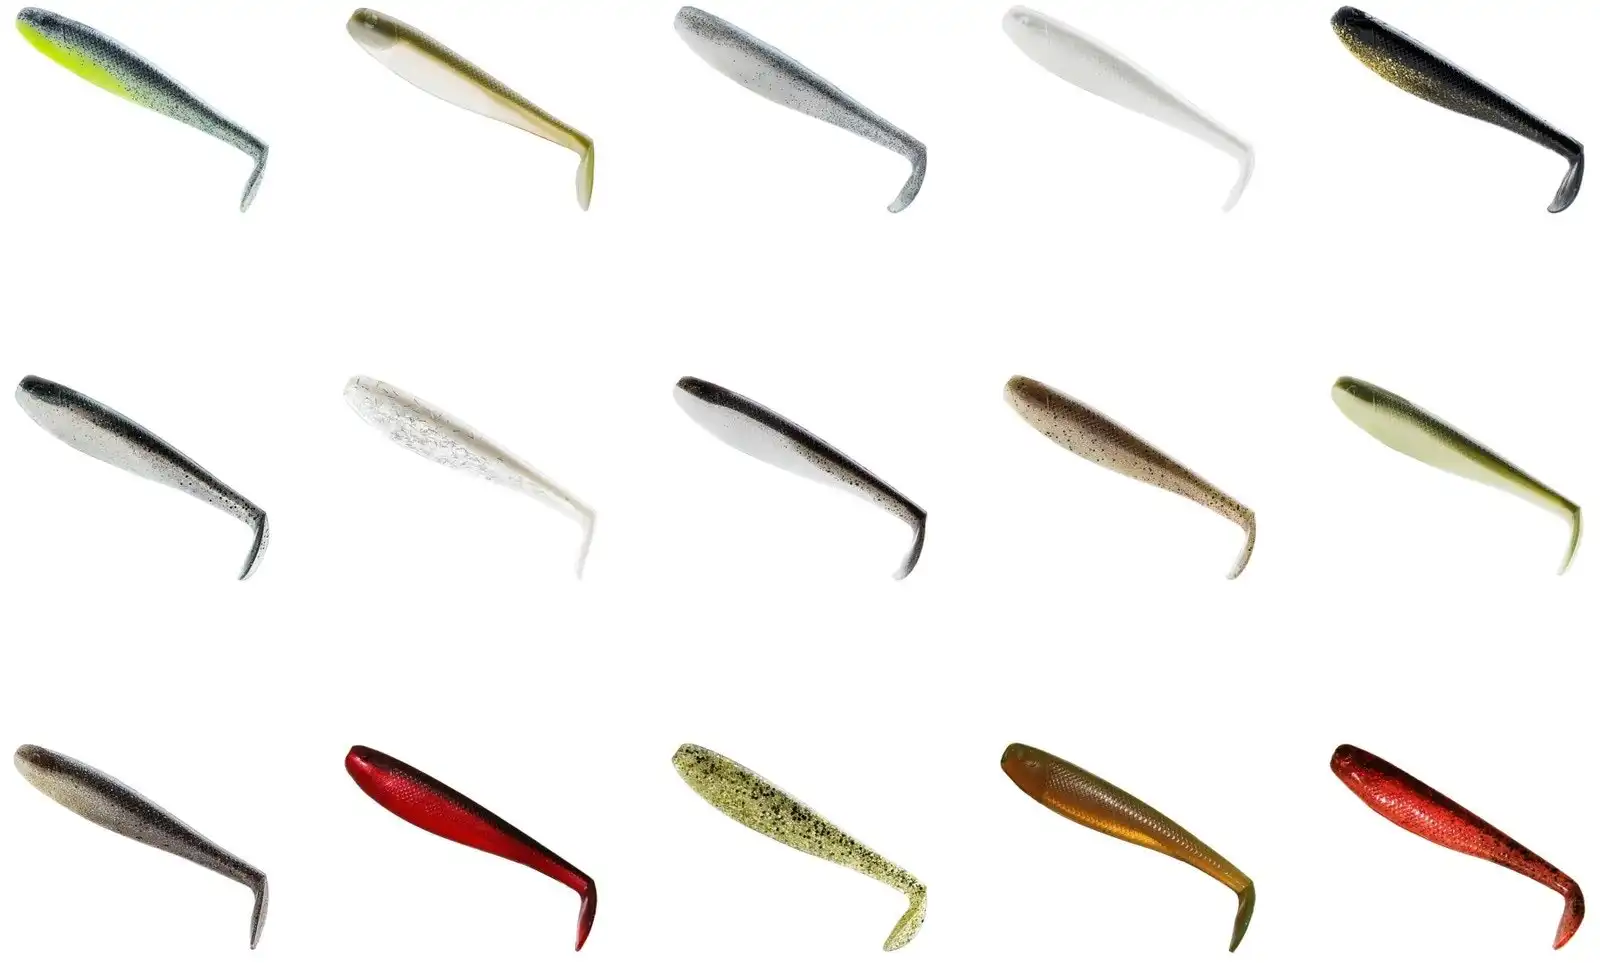 Zman 6 Inch SwimmerZ Soft Plastic Lures - 3 Pack of Z Man Soft Plastic Lures